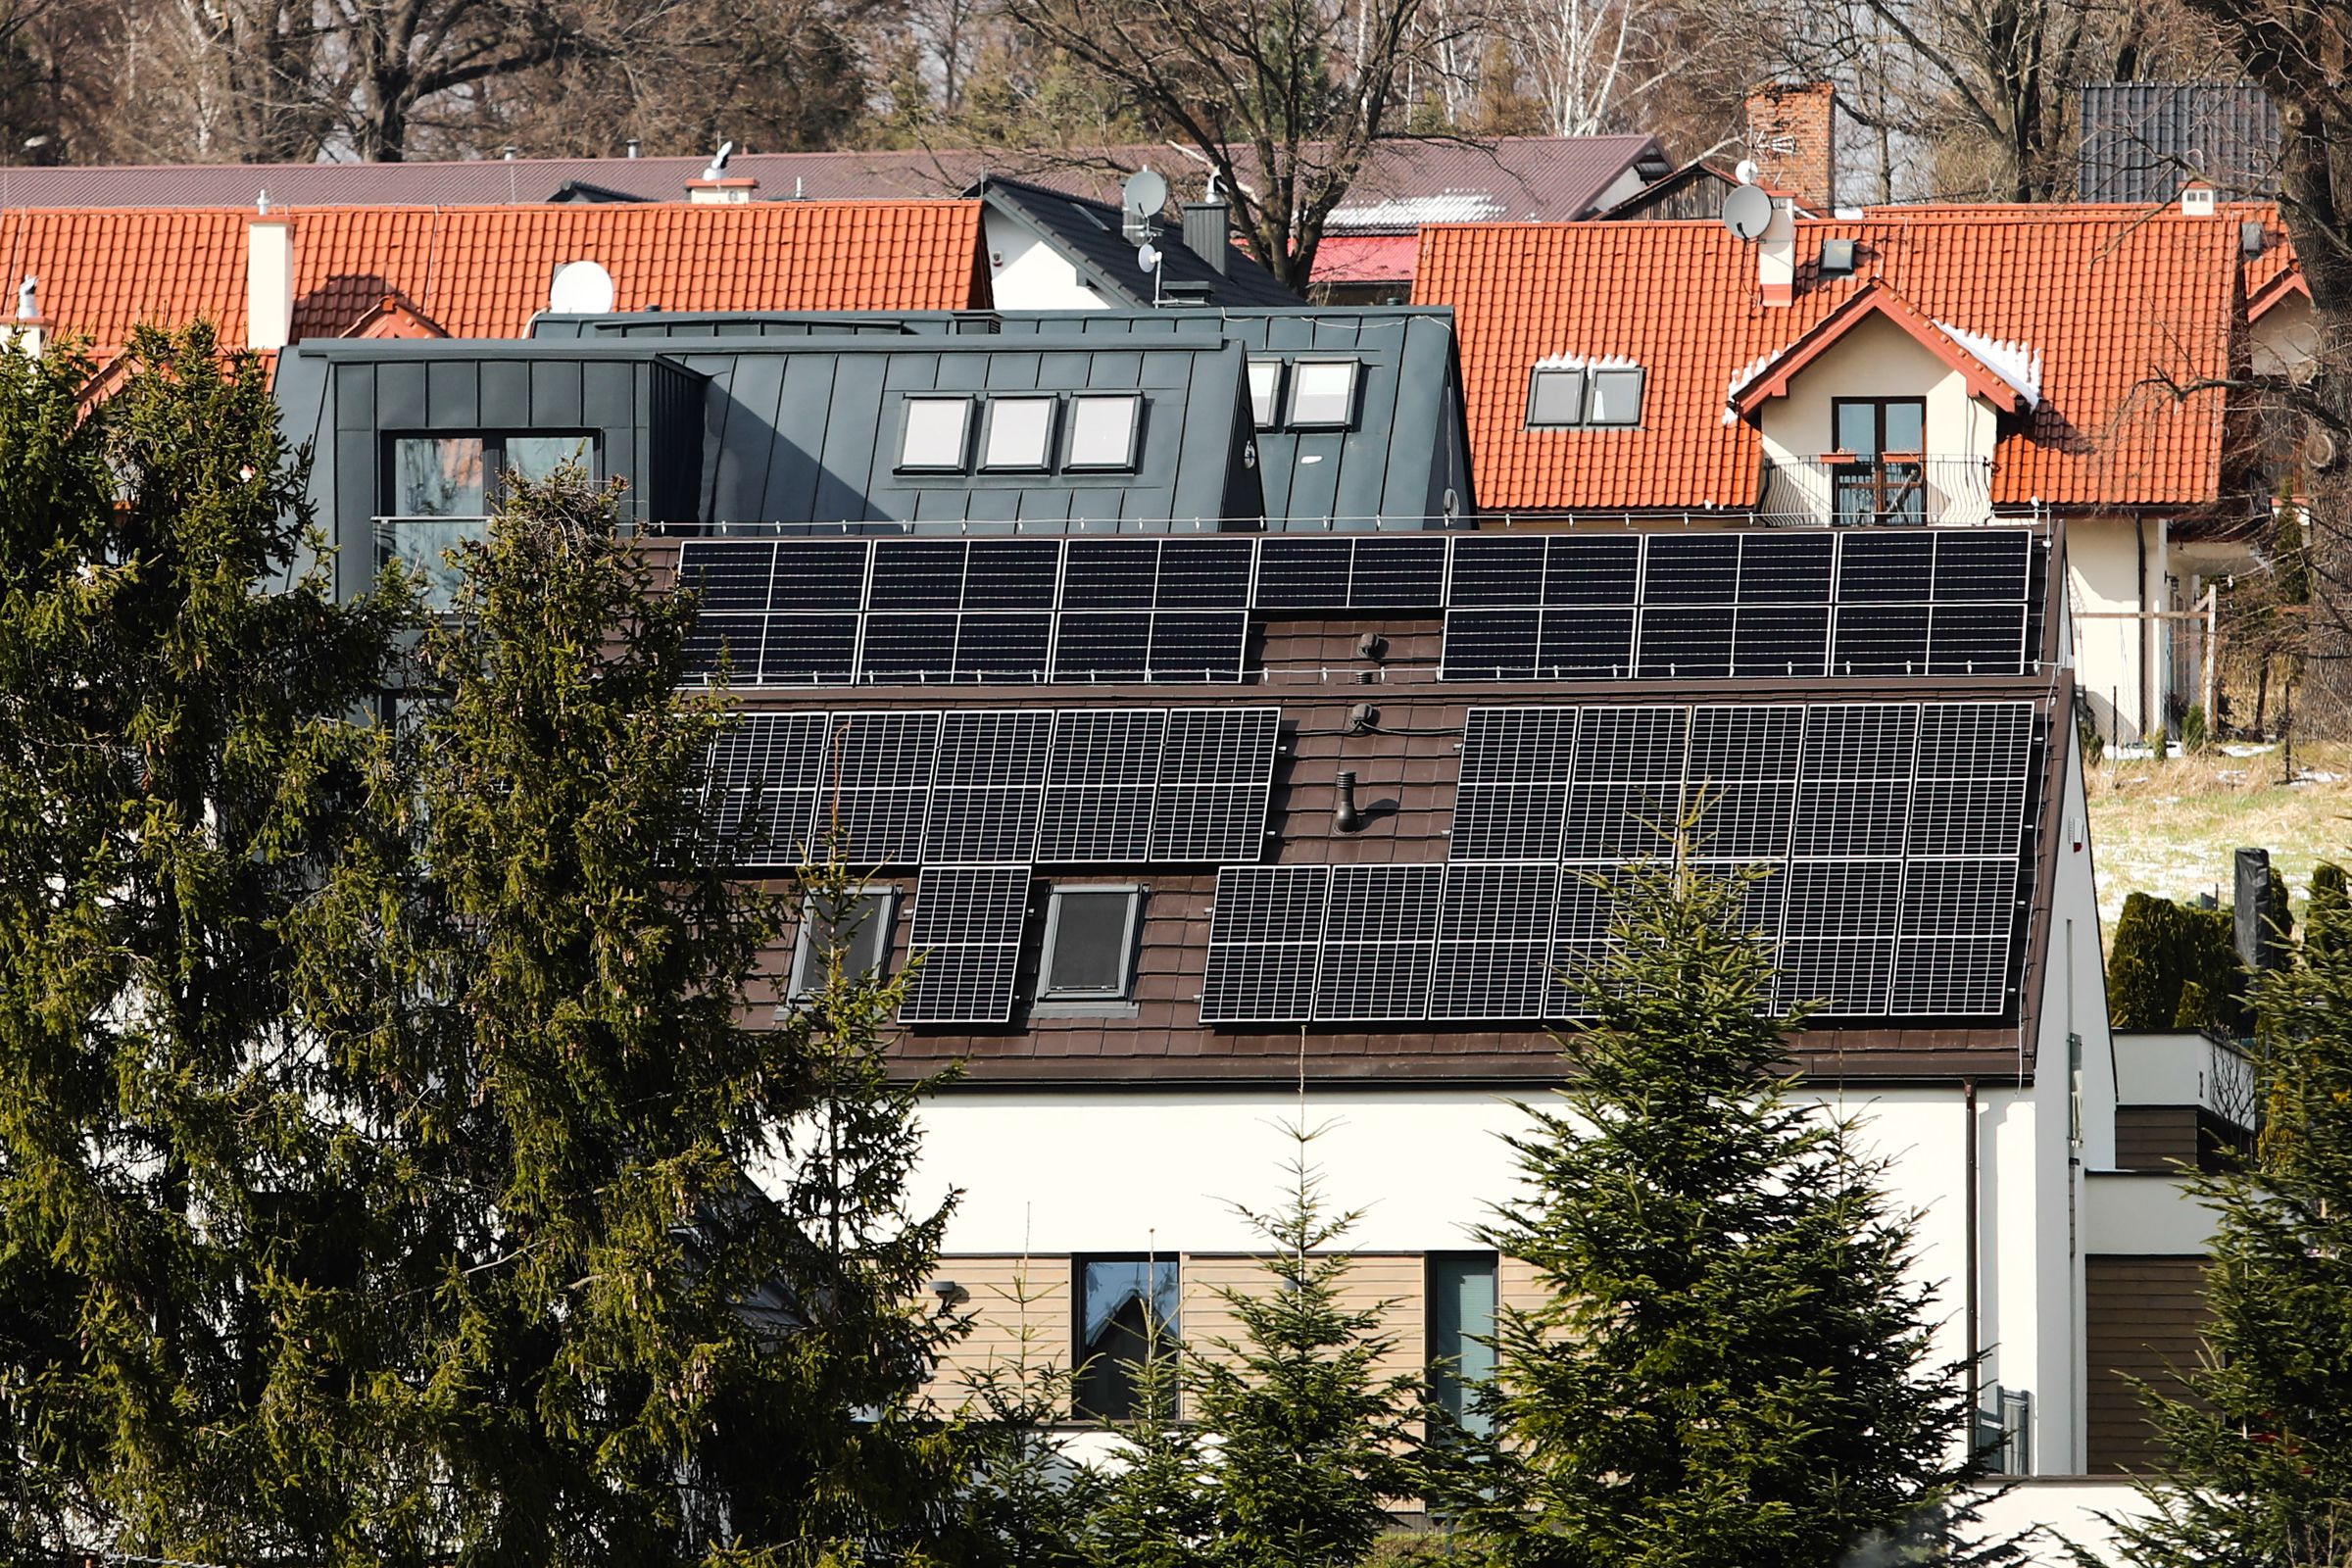 Solar panels are seen on houses